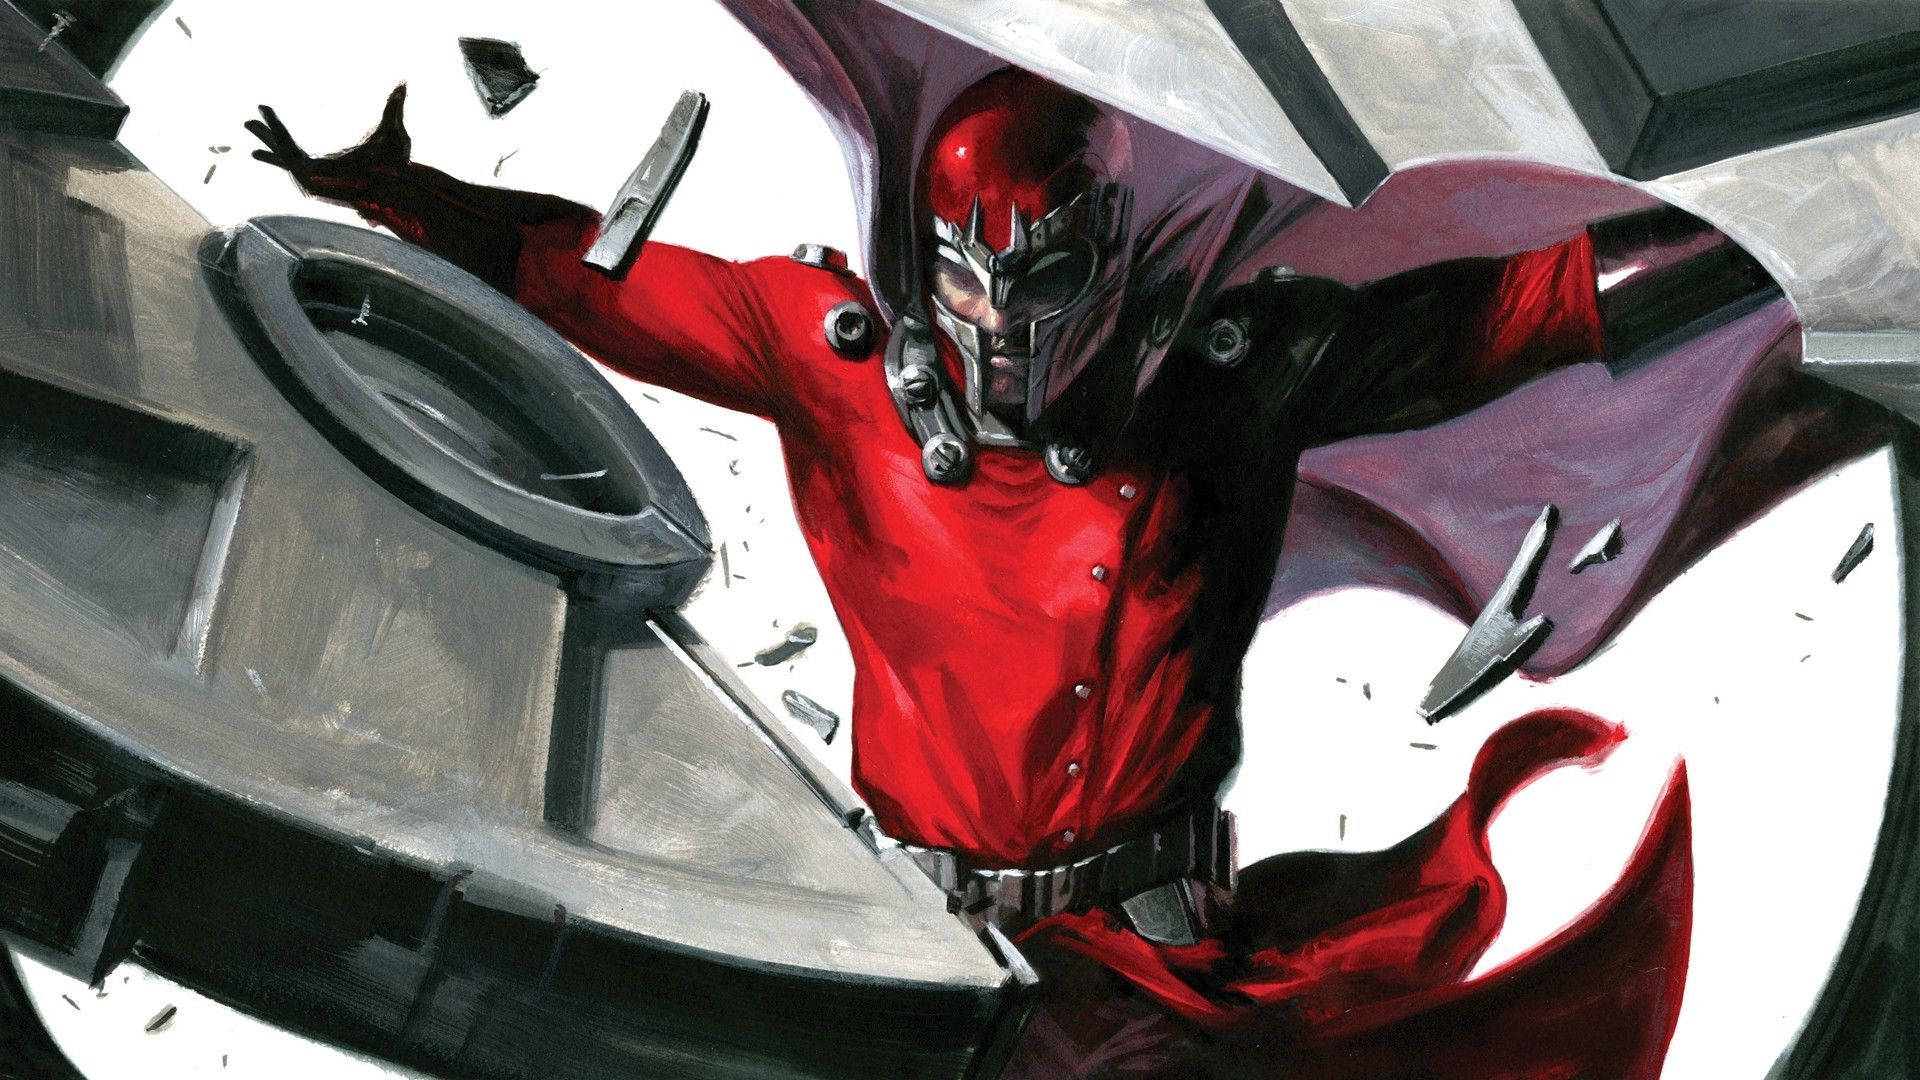 1920X1080 Magneto Wallpaper and Background